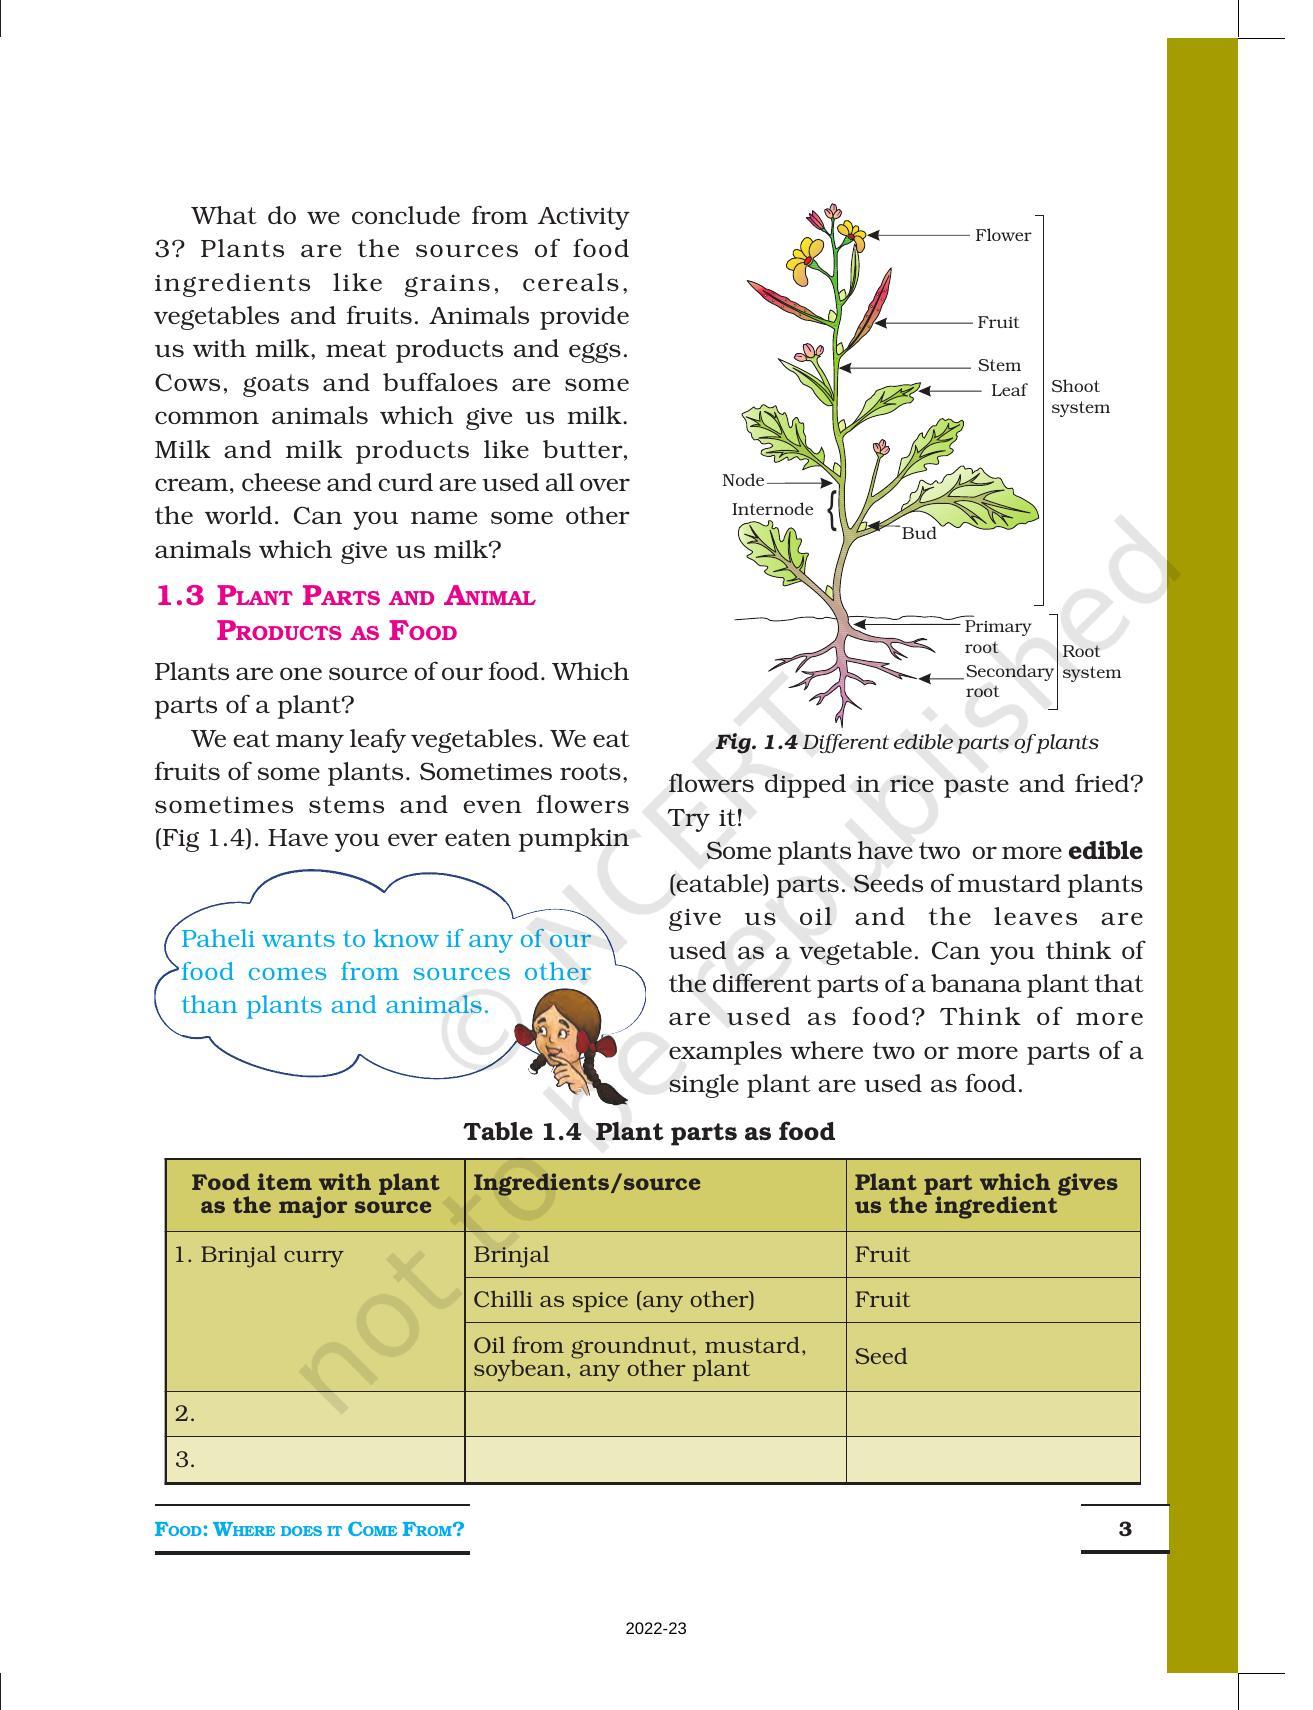 NCERT Book for Class 6 Science: Chapter 1-Food, Where Does It Come From? - Page 3